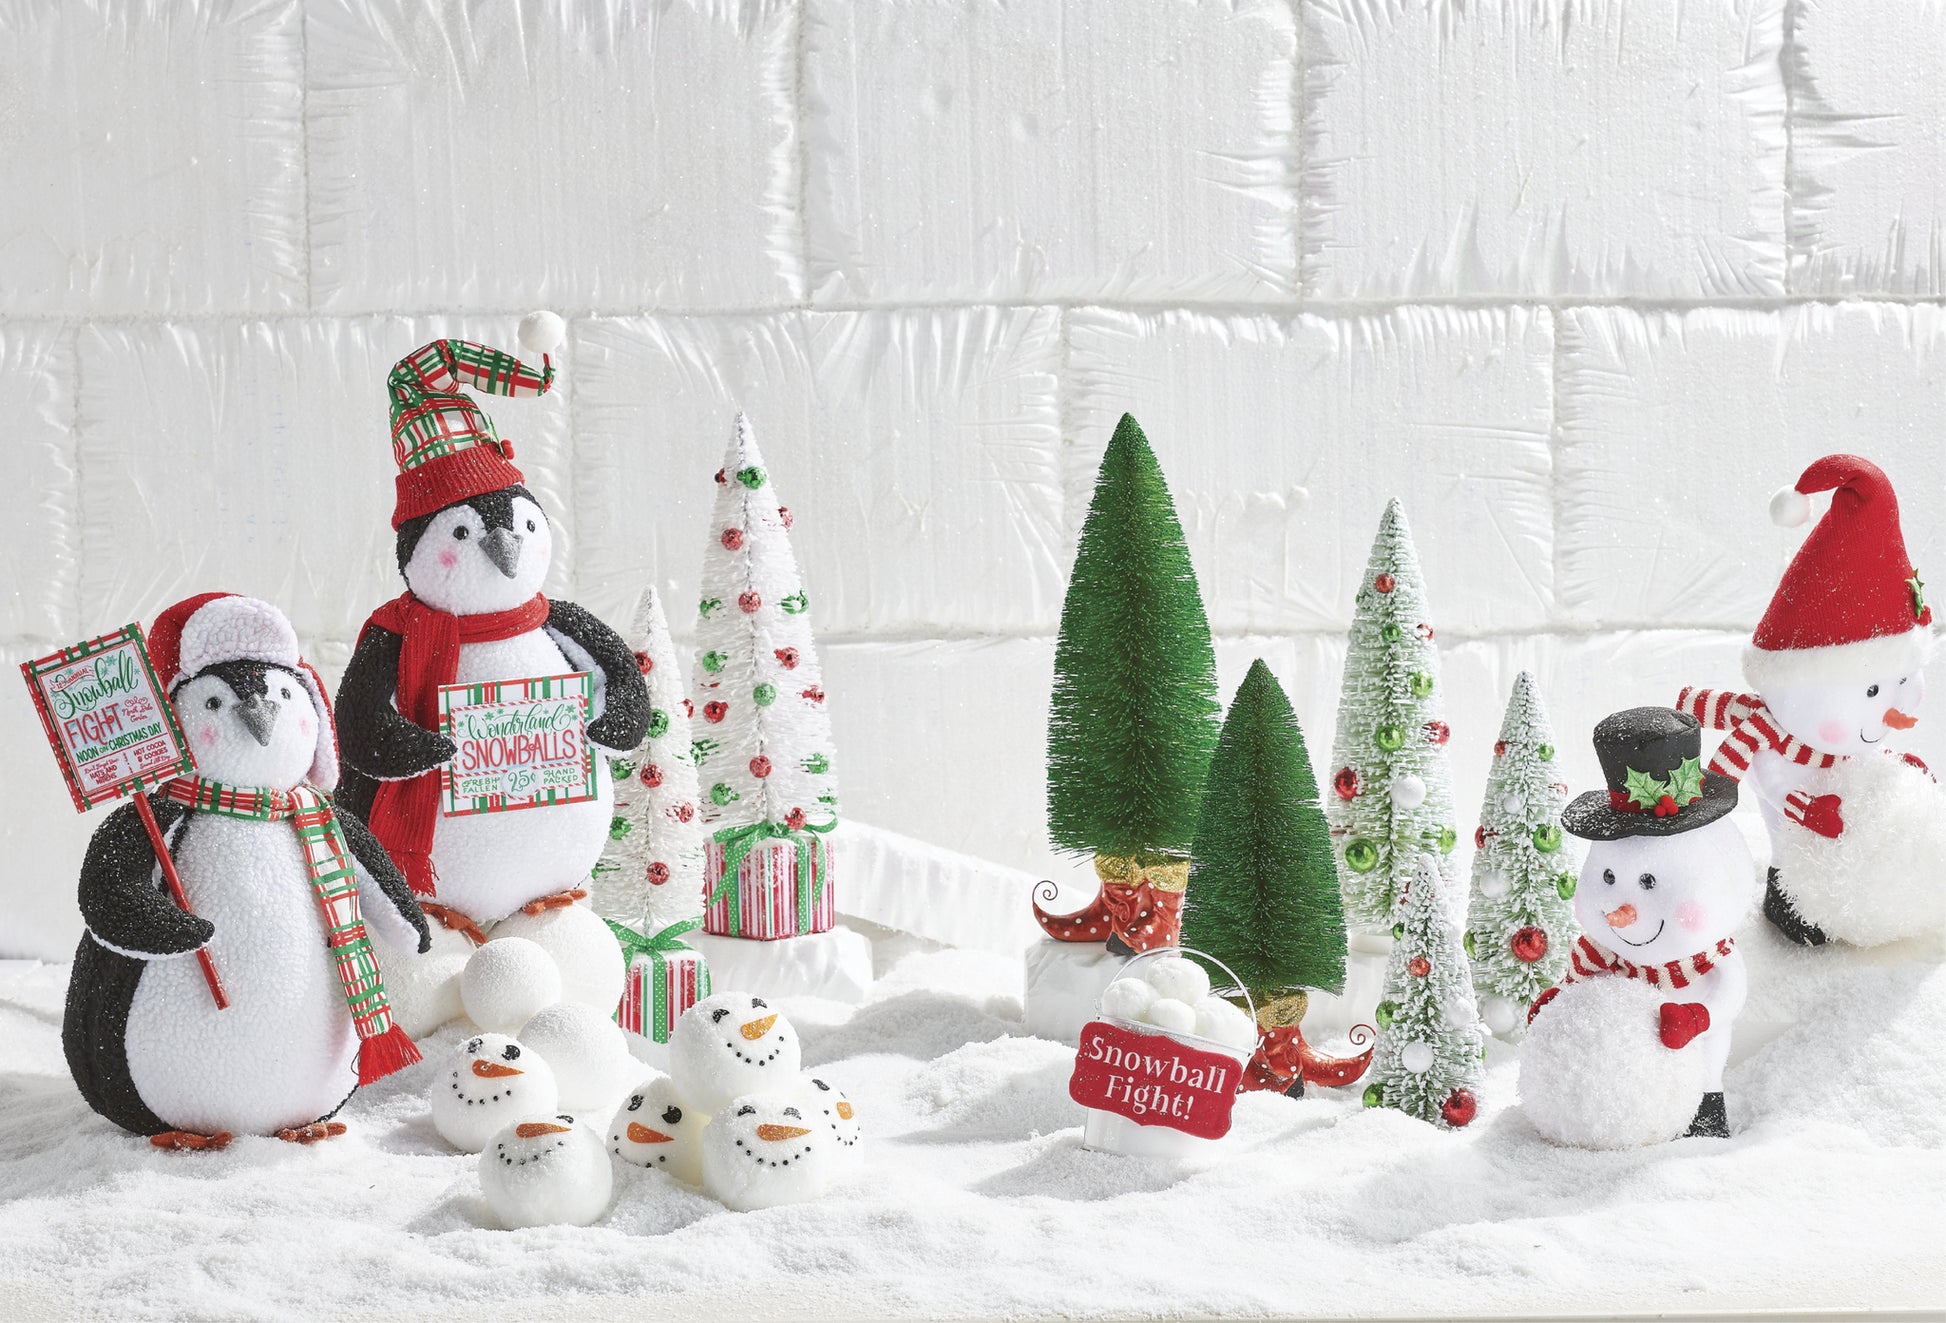 6.5" Snowball Fight Bucket Ornaments set in faux snow, surrounded by plush penguins and mini Christmas trees. So cute and enticing some holiday fun! Red and White. North Pole Friends Theme.